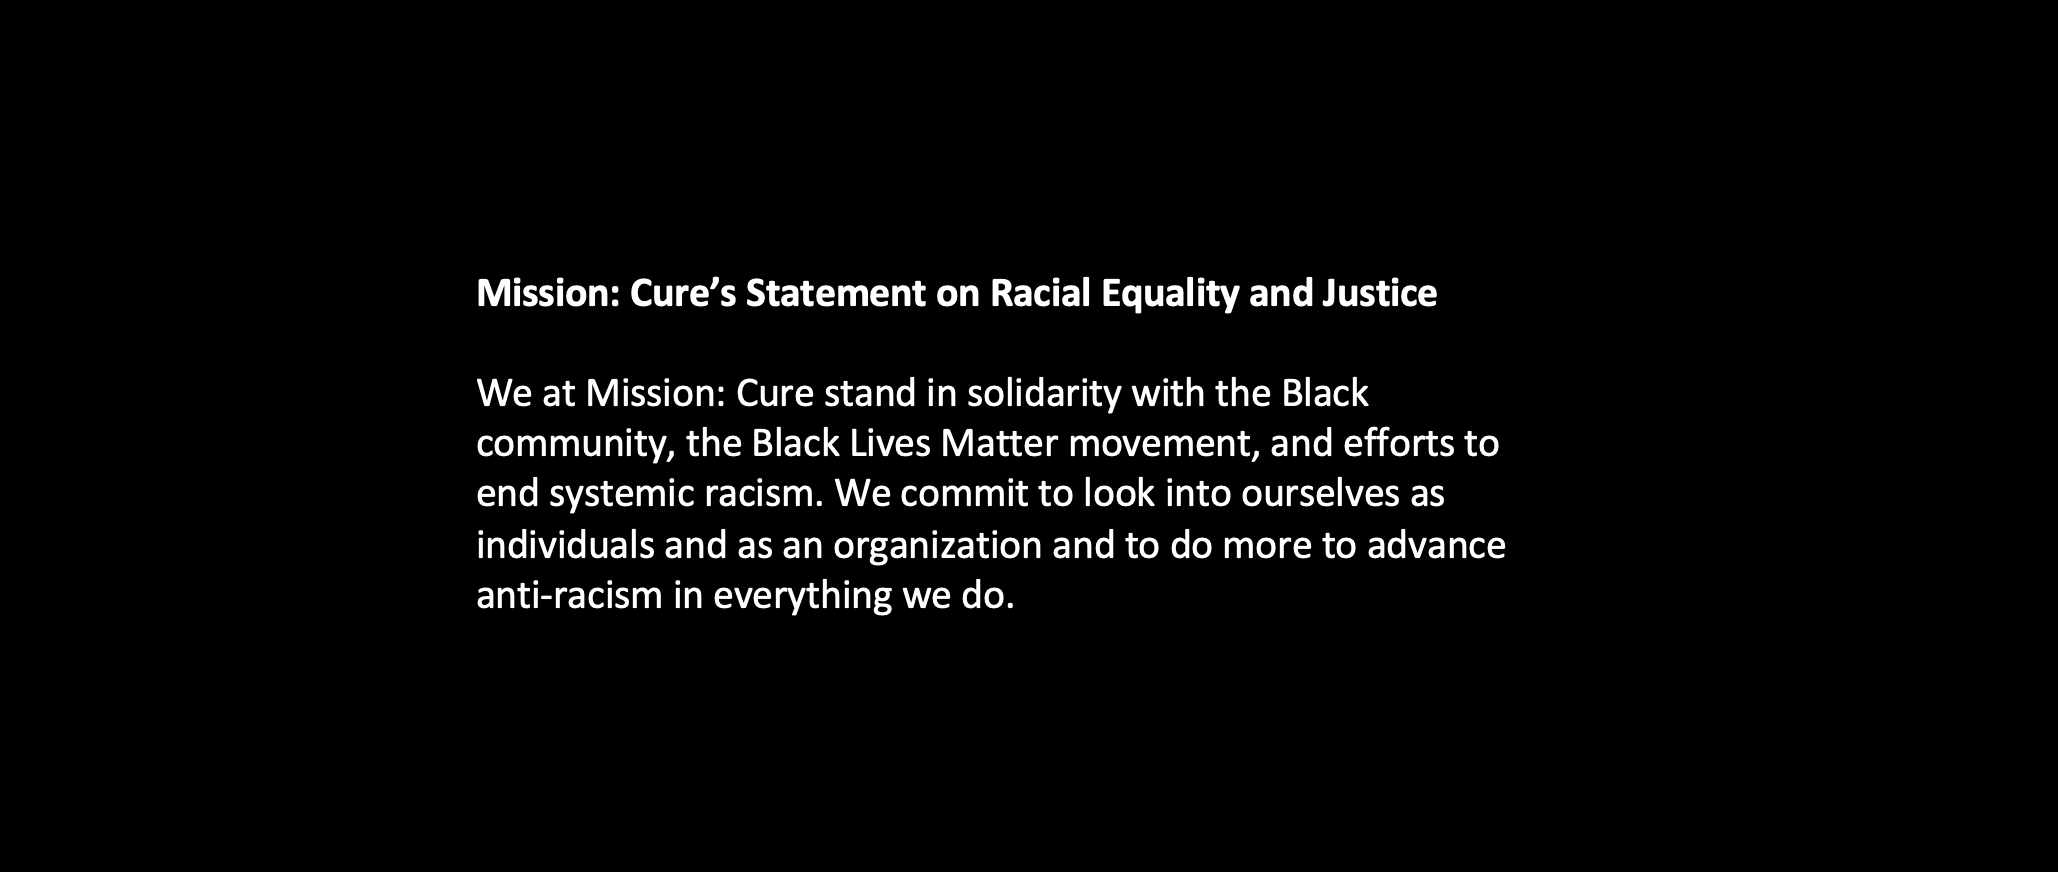 Mission: Cure’s Statement on Racial Equality and Justice